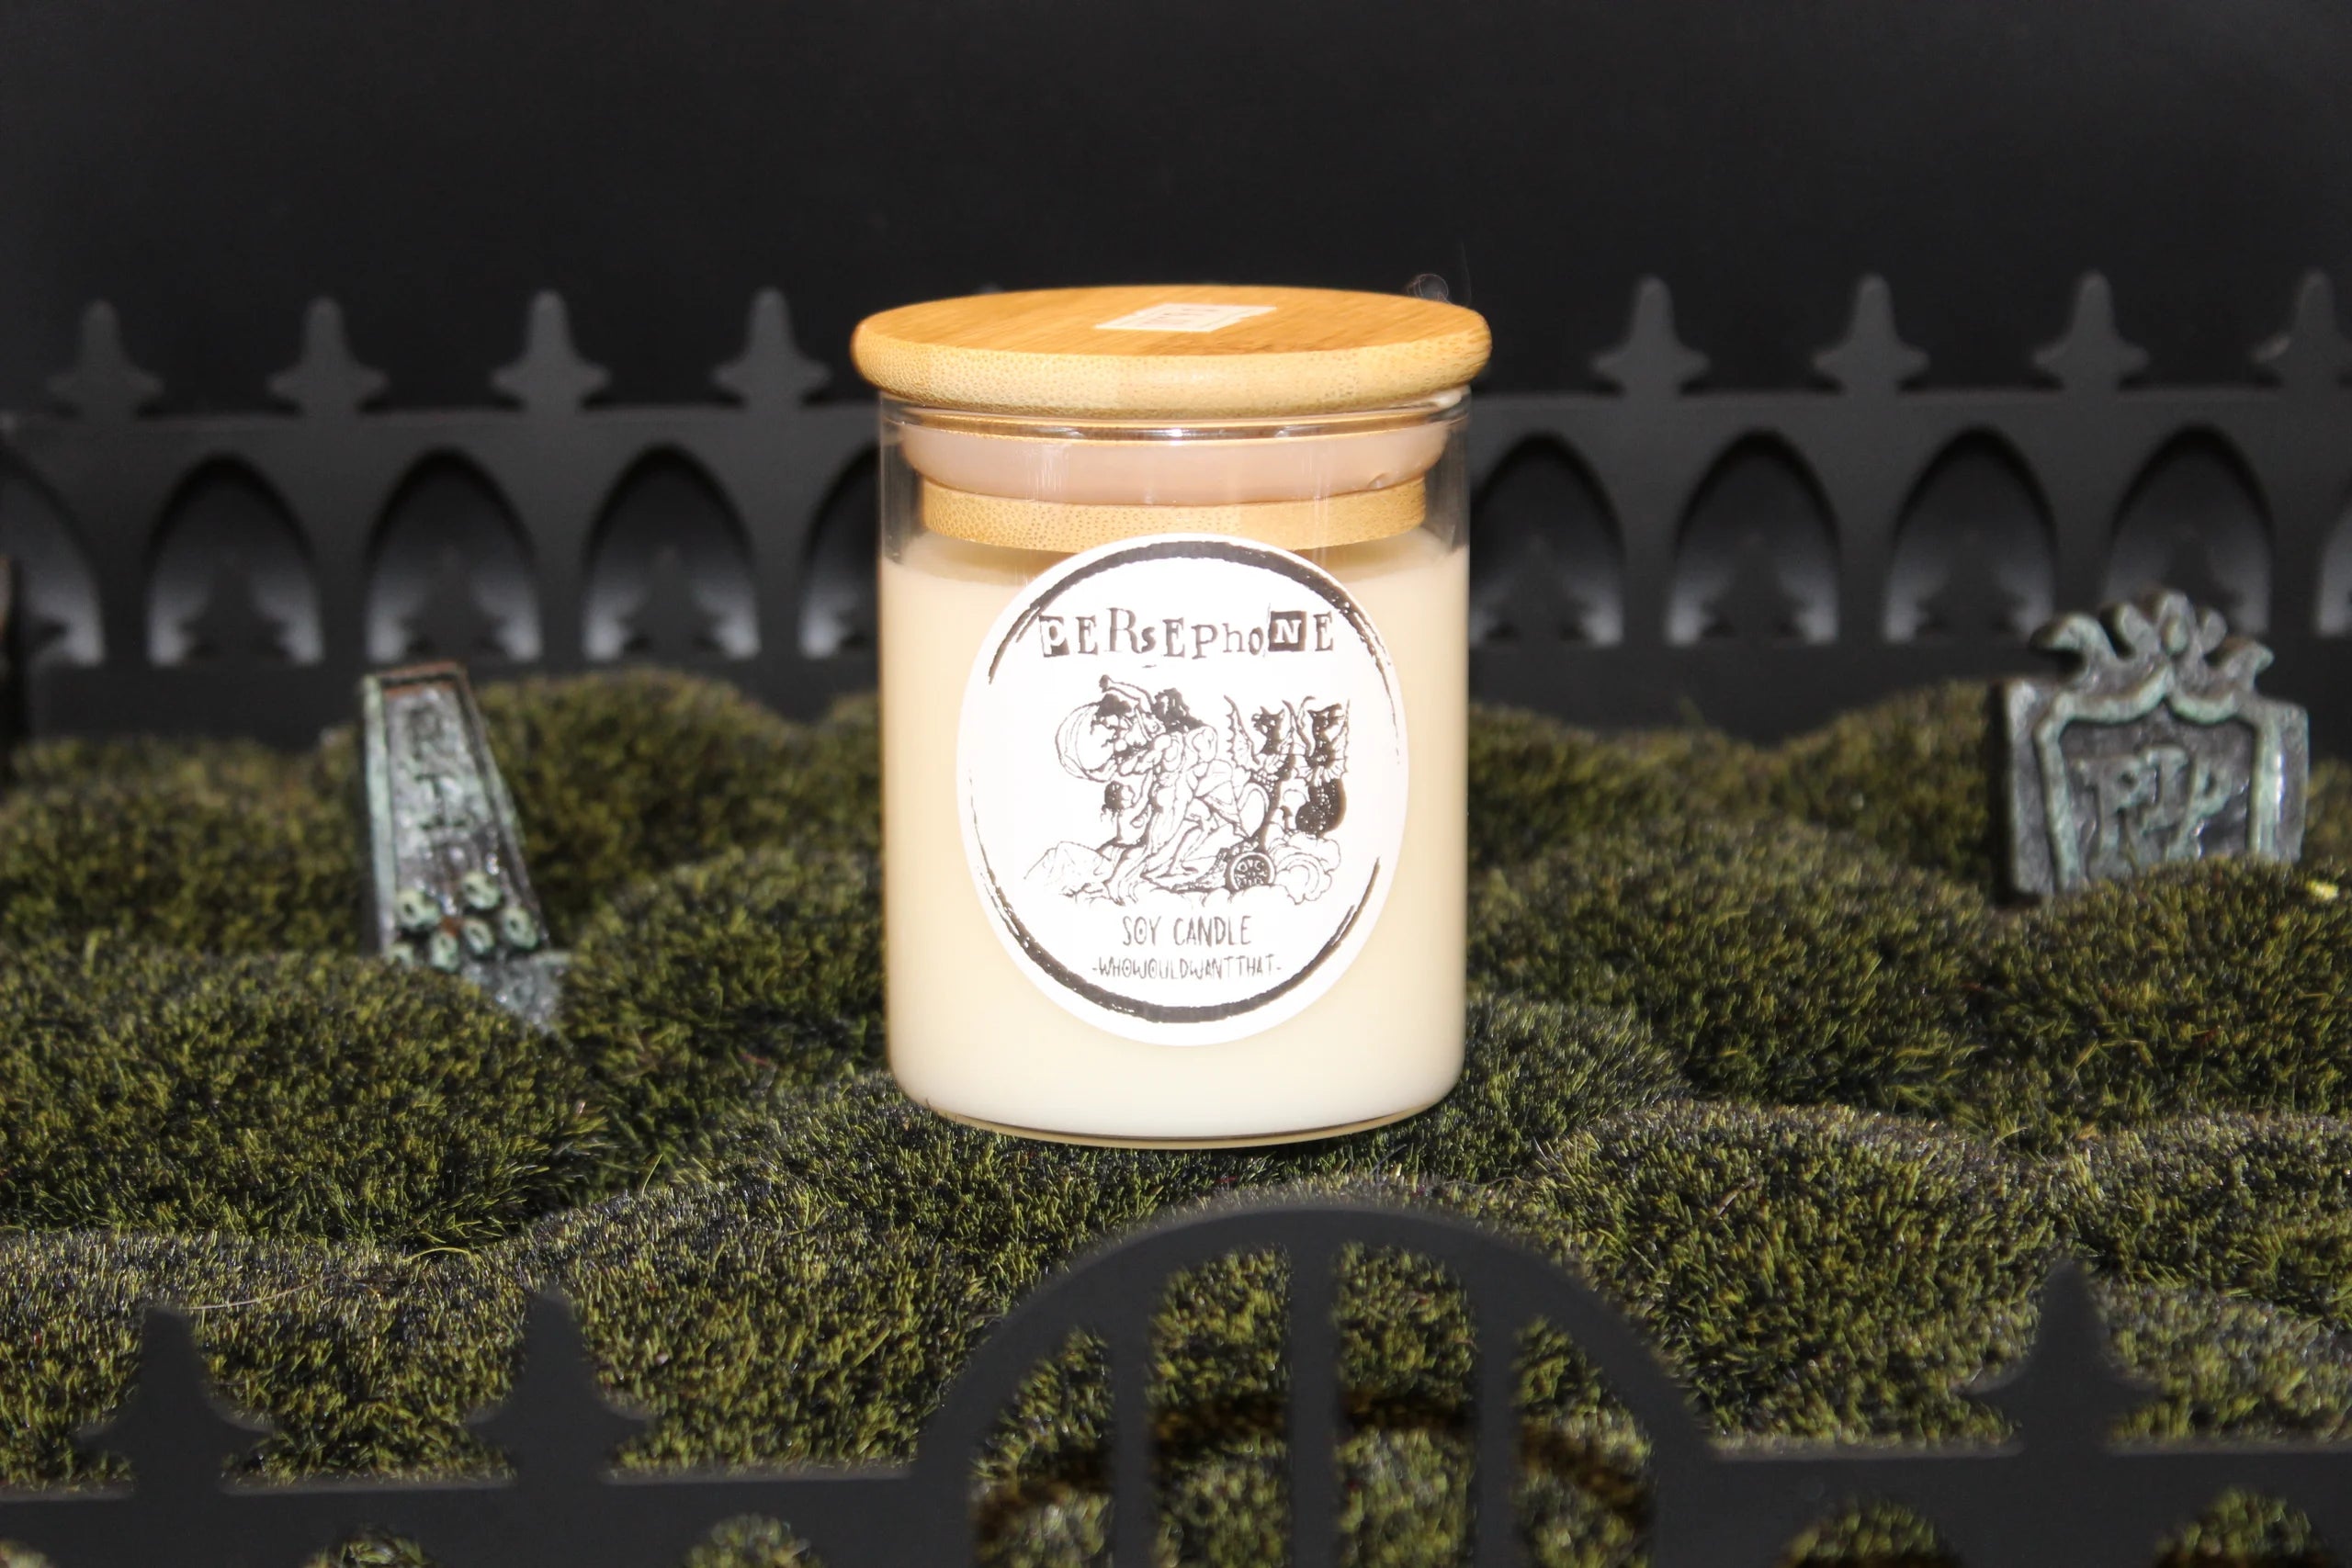 Persephone Candle - 4 oz Scented Soy Candle - Who Would Want That